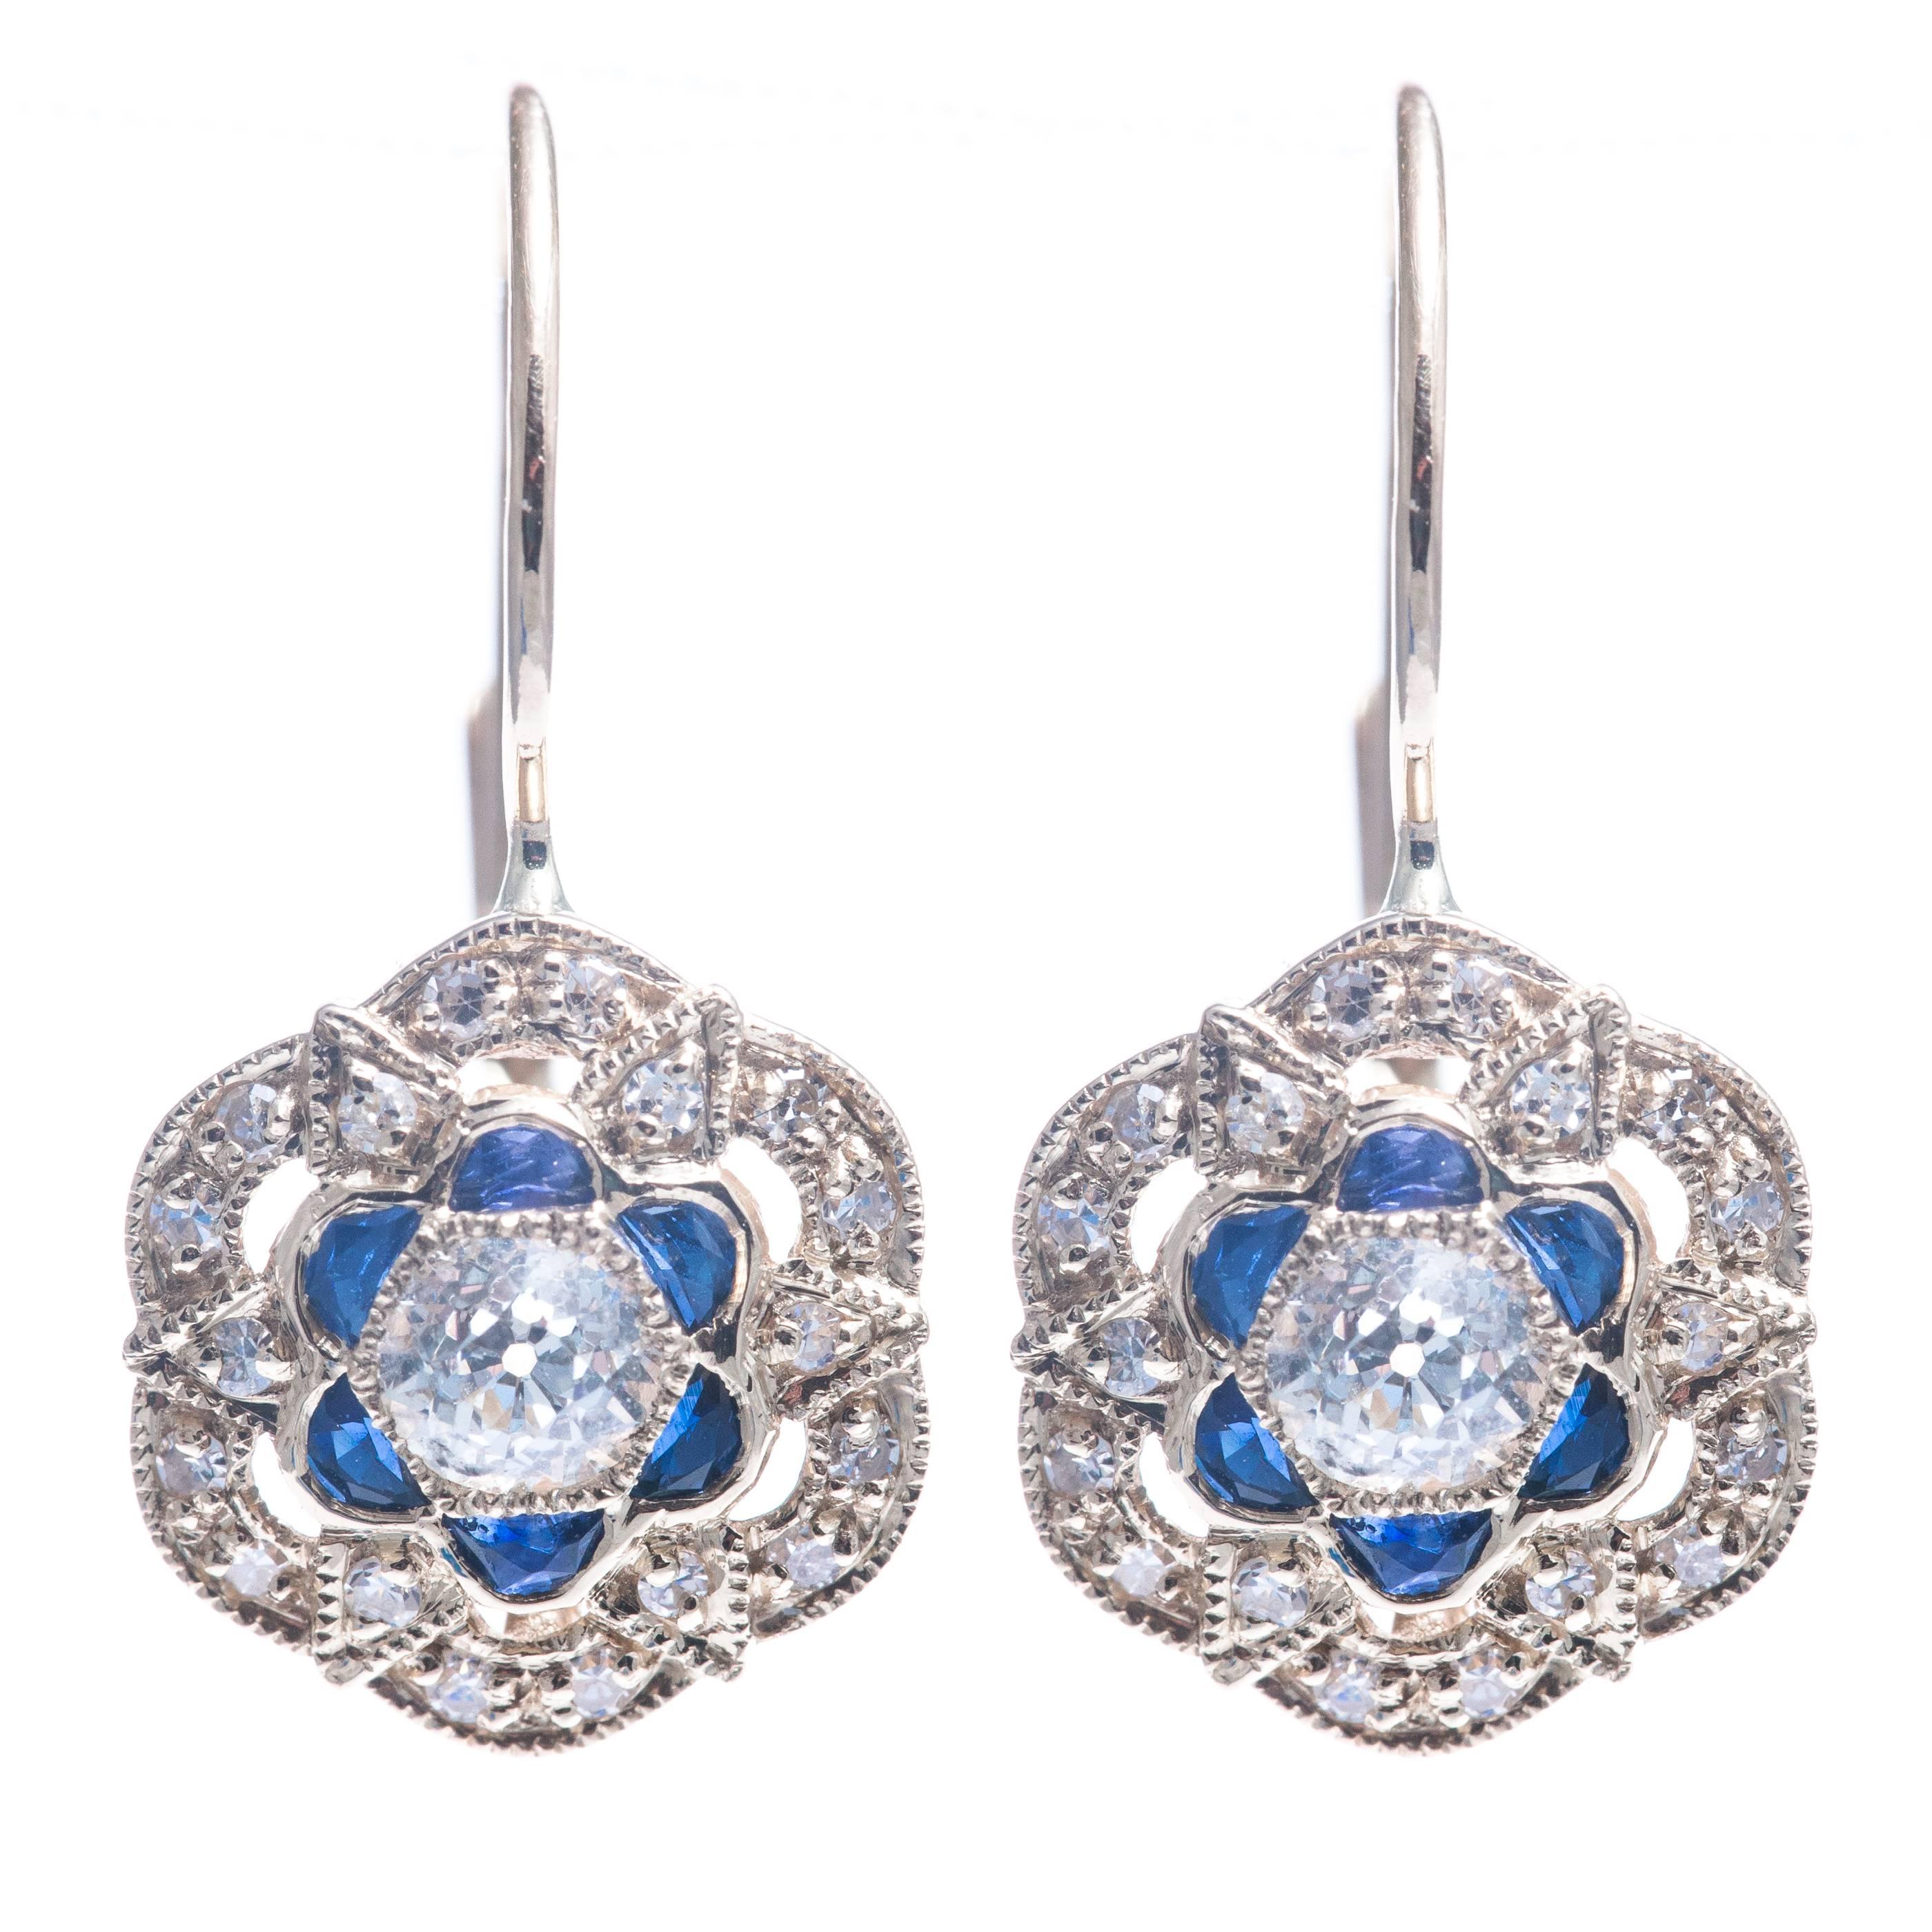 Sparkling Diamond and Sapphire Flower Earrings in White Gold